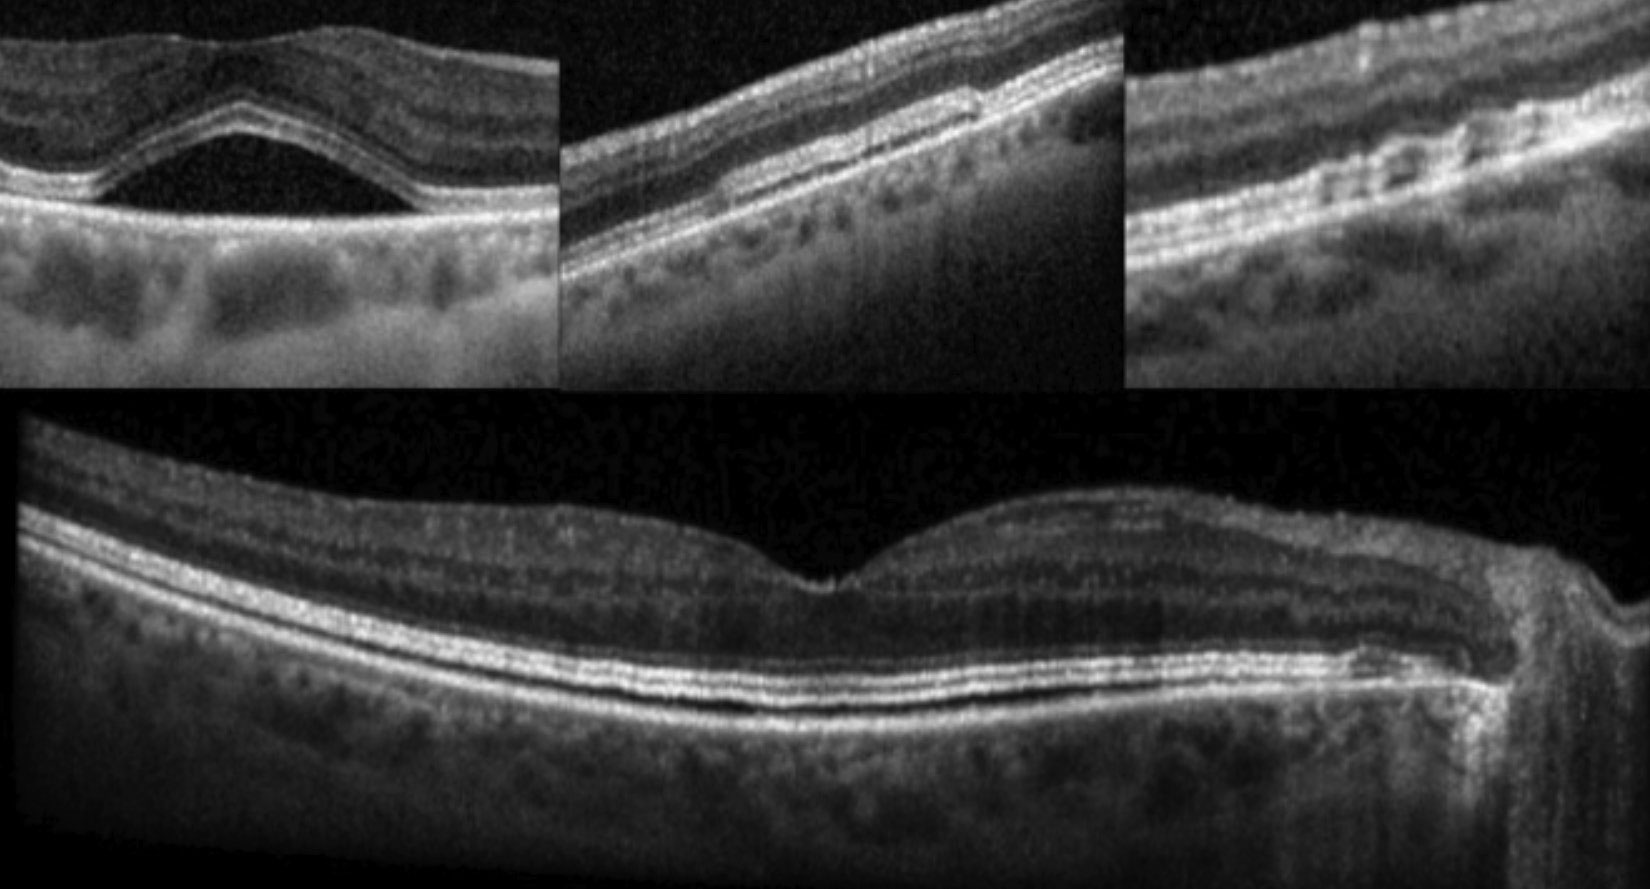 Fig. 4. OCT reveals fluid between the interdigitation zone and retinal pigment epithelium in varying configurations in patients with MEKAR.